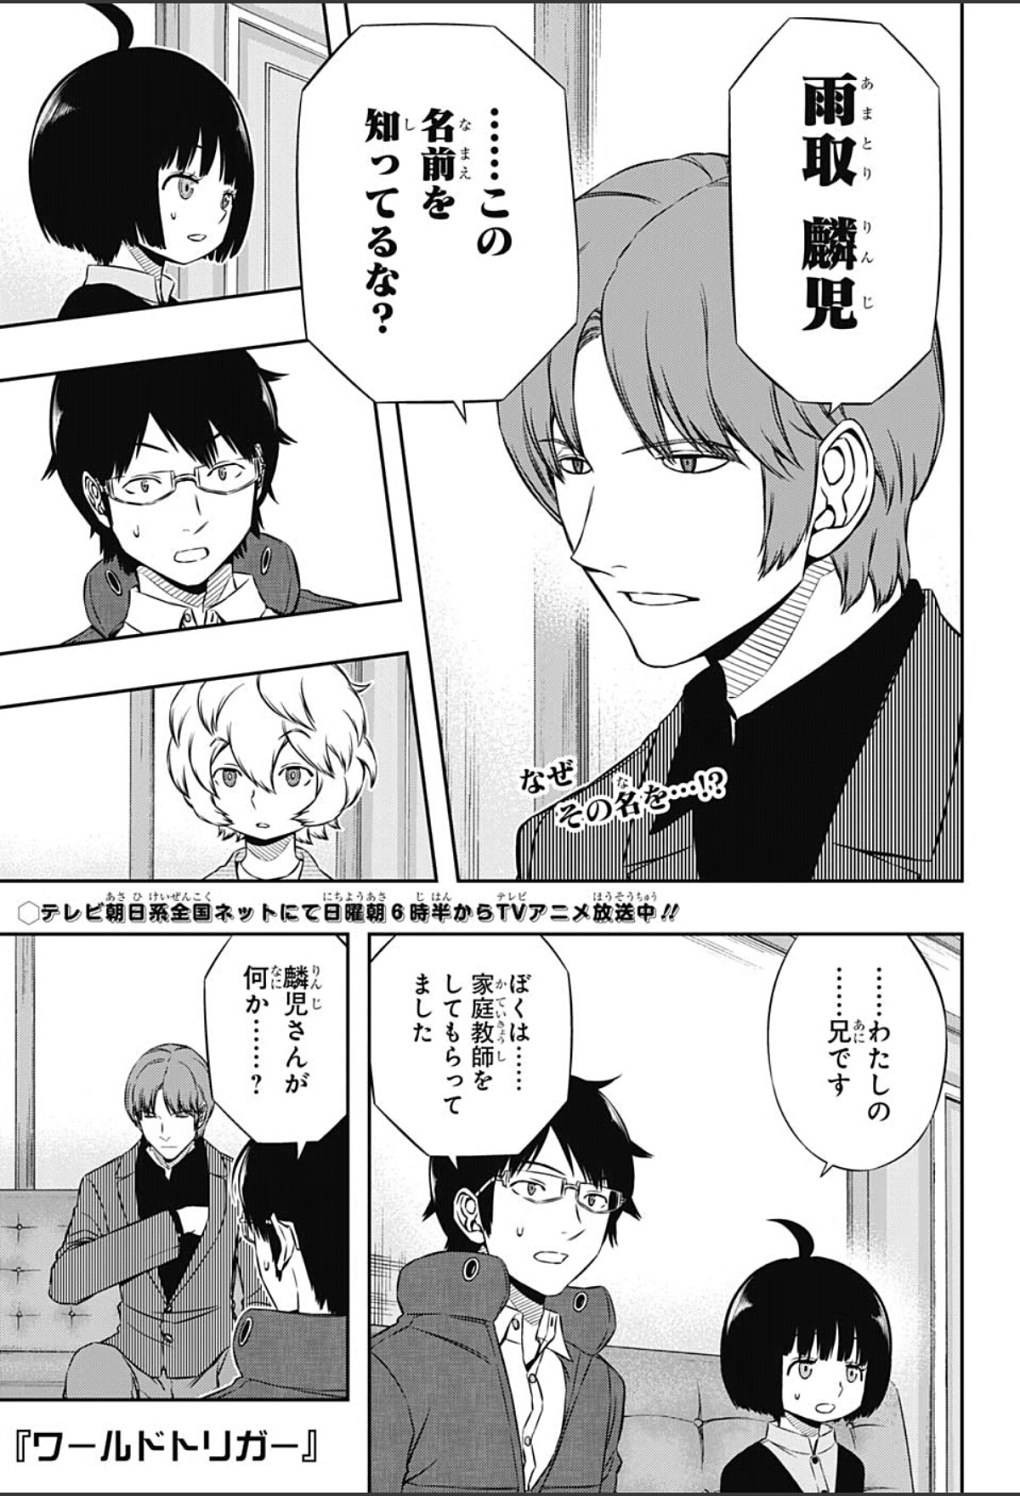 World Trigger - Chapter 106 - Page 2